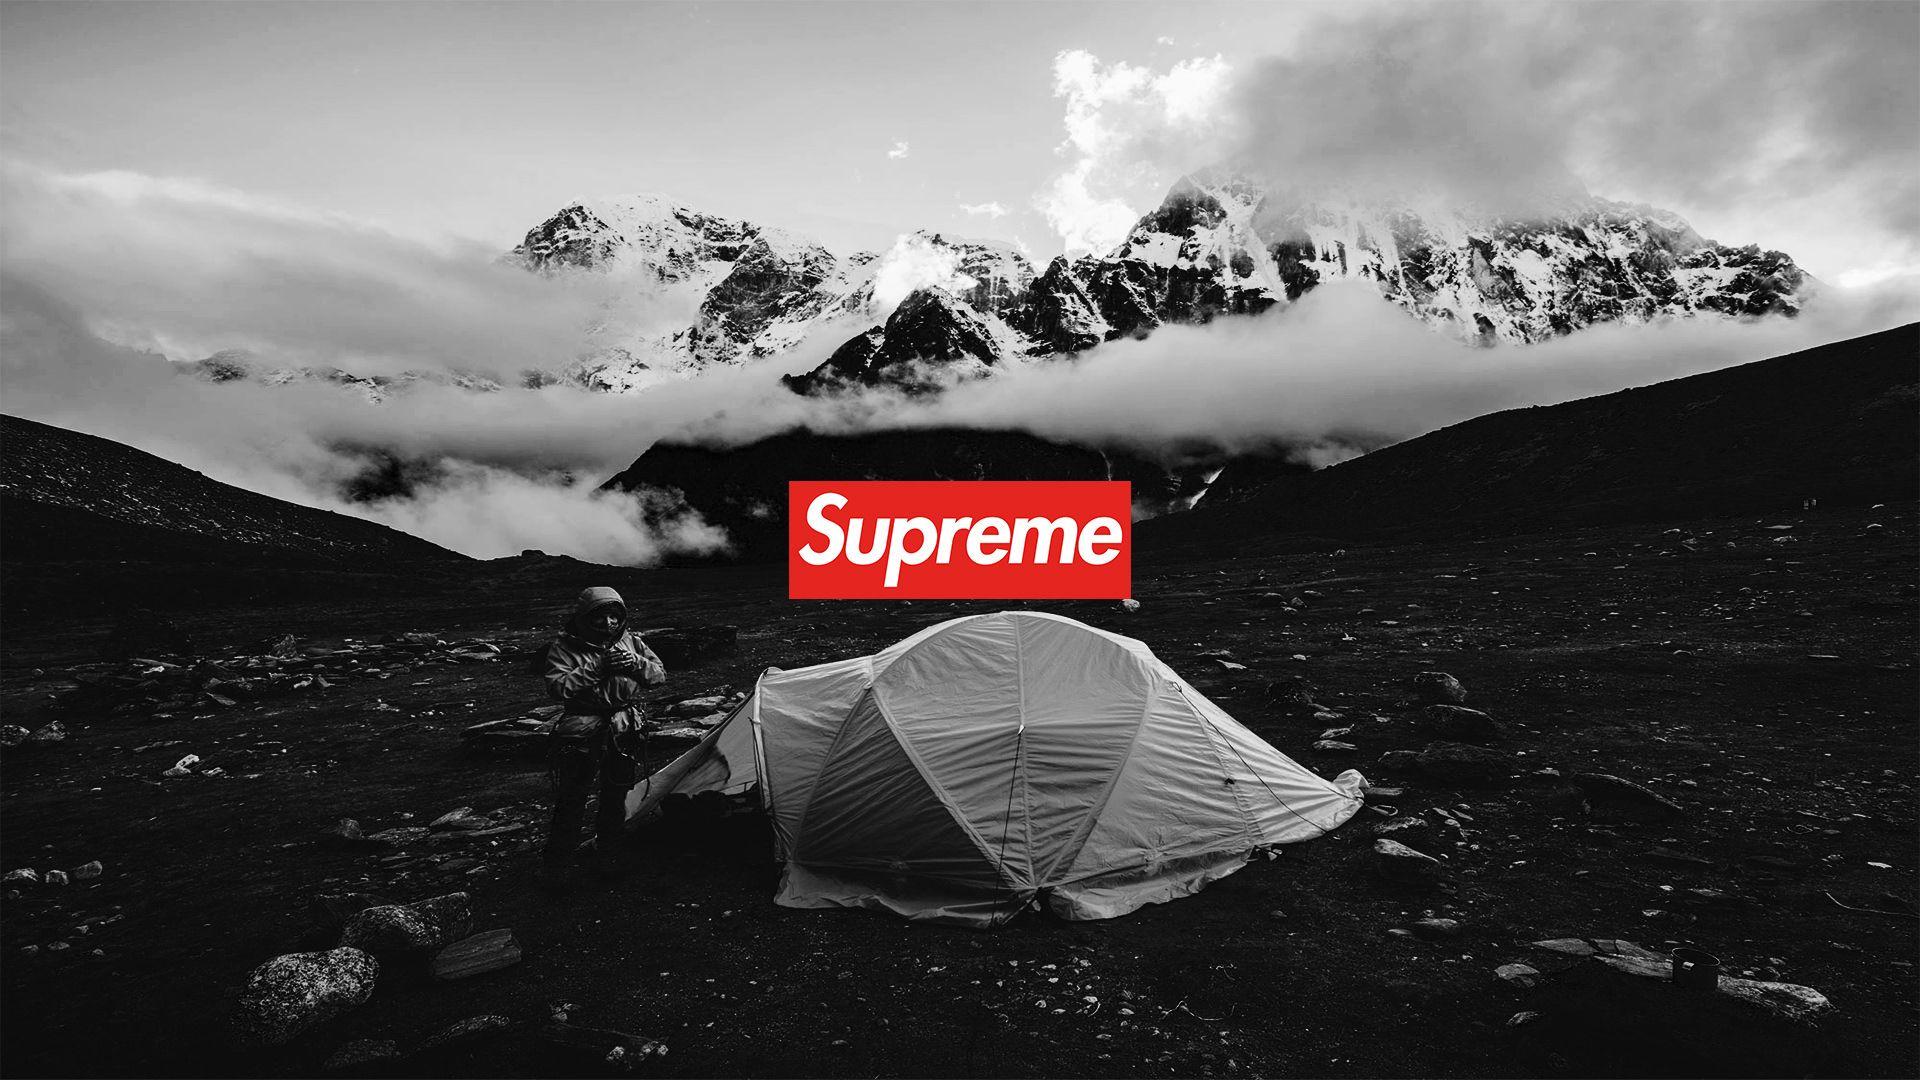 Supreme Wallpapers Top 100 Best Supreme Wallpapers  HQ 